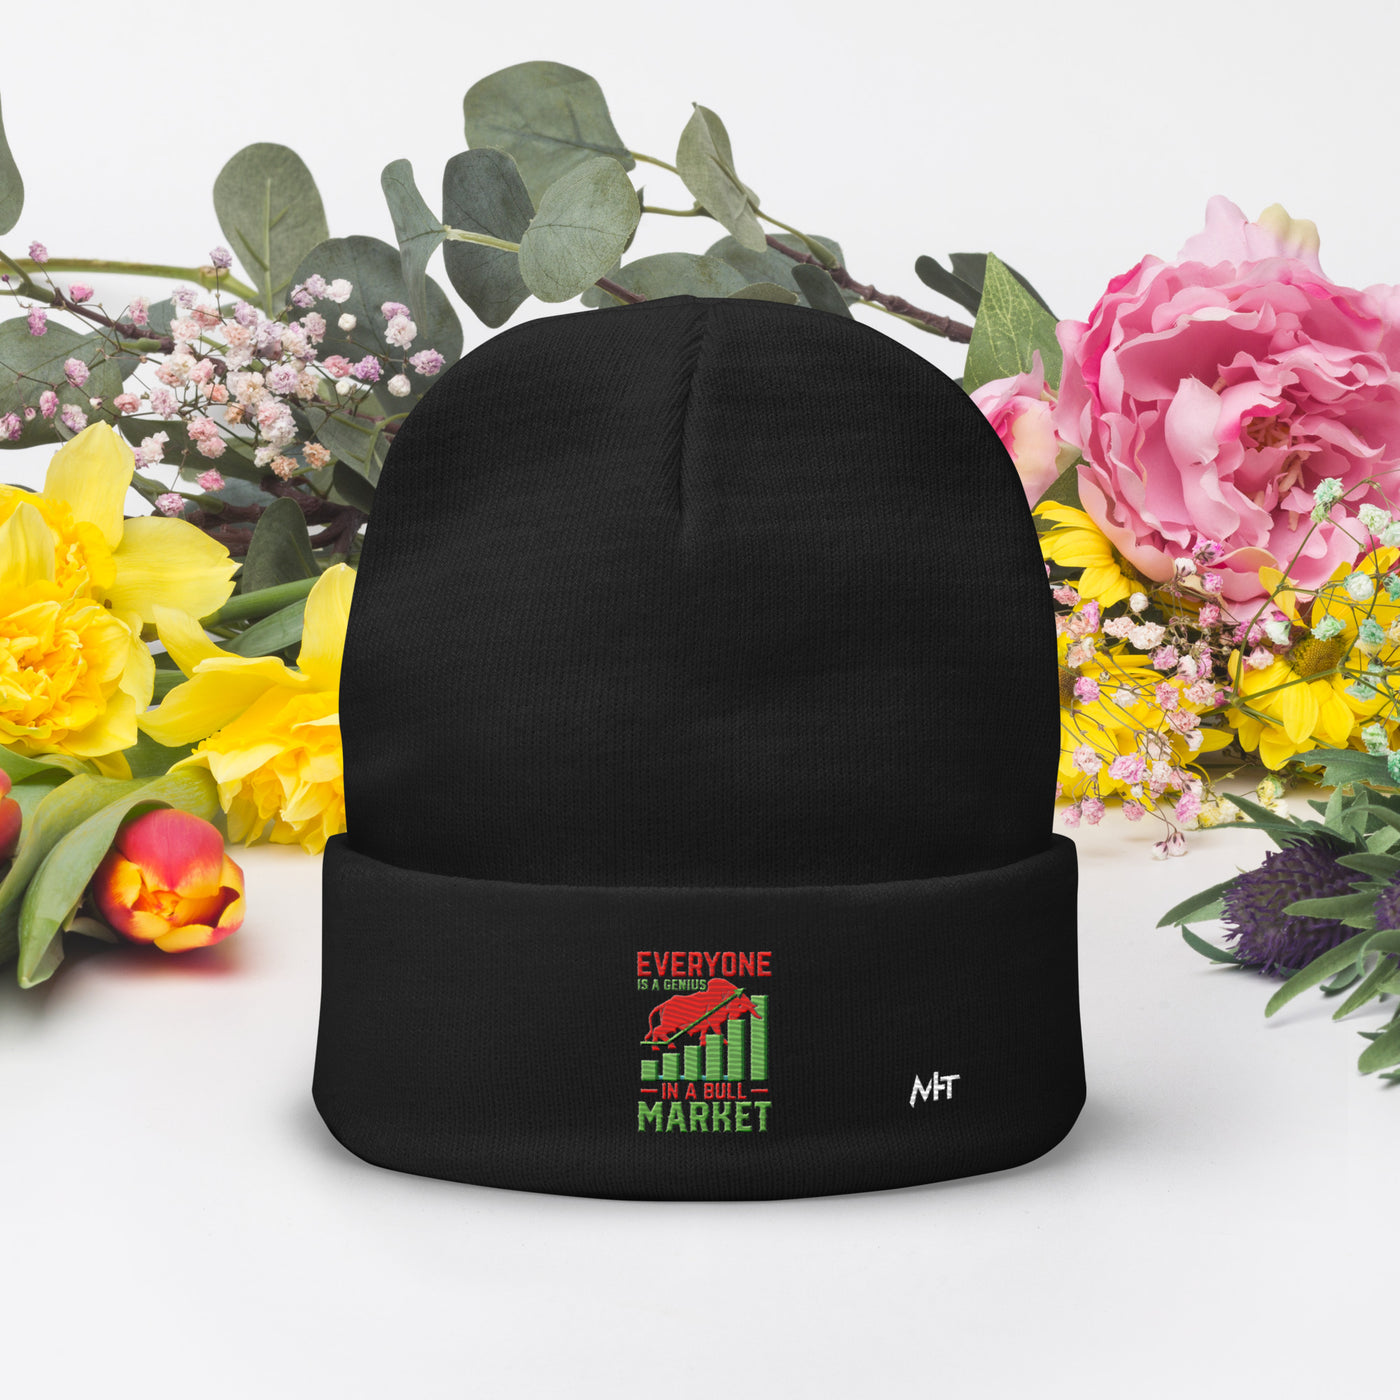 Everyone is a Genius in a Bull Market V1 - Embroidered Beanie